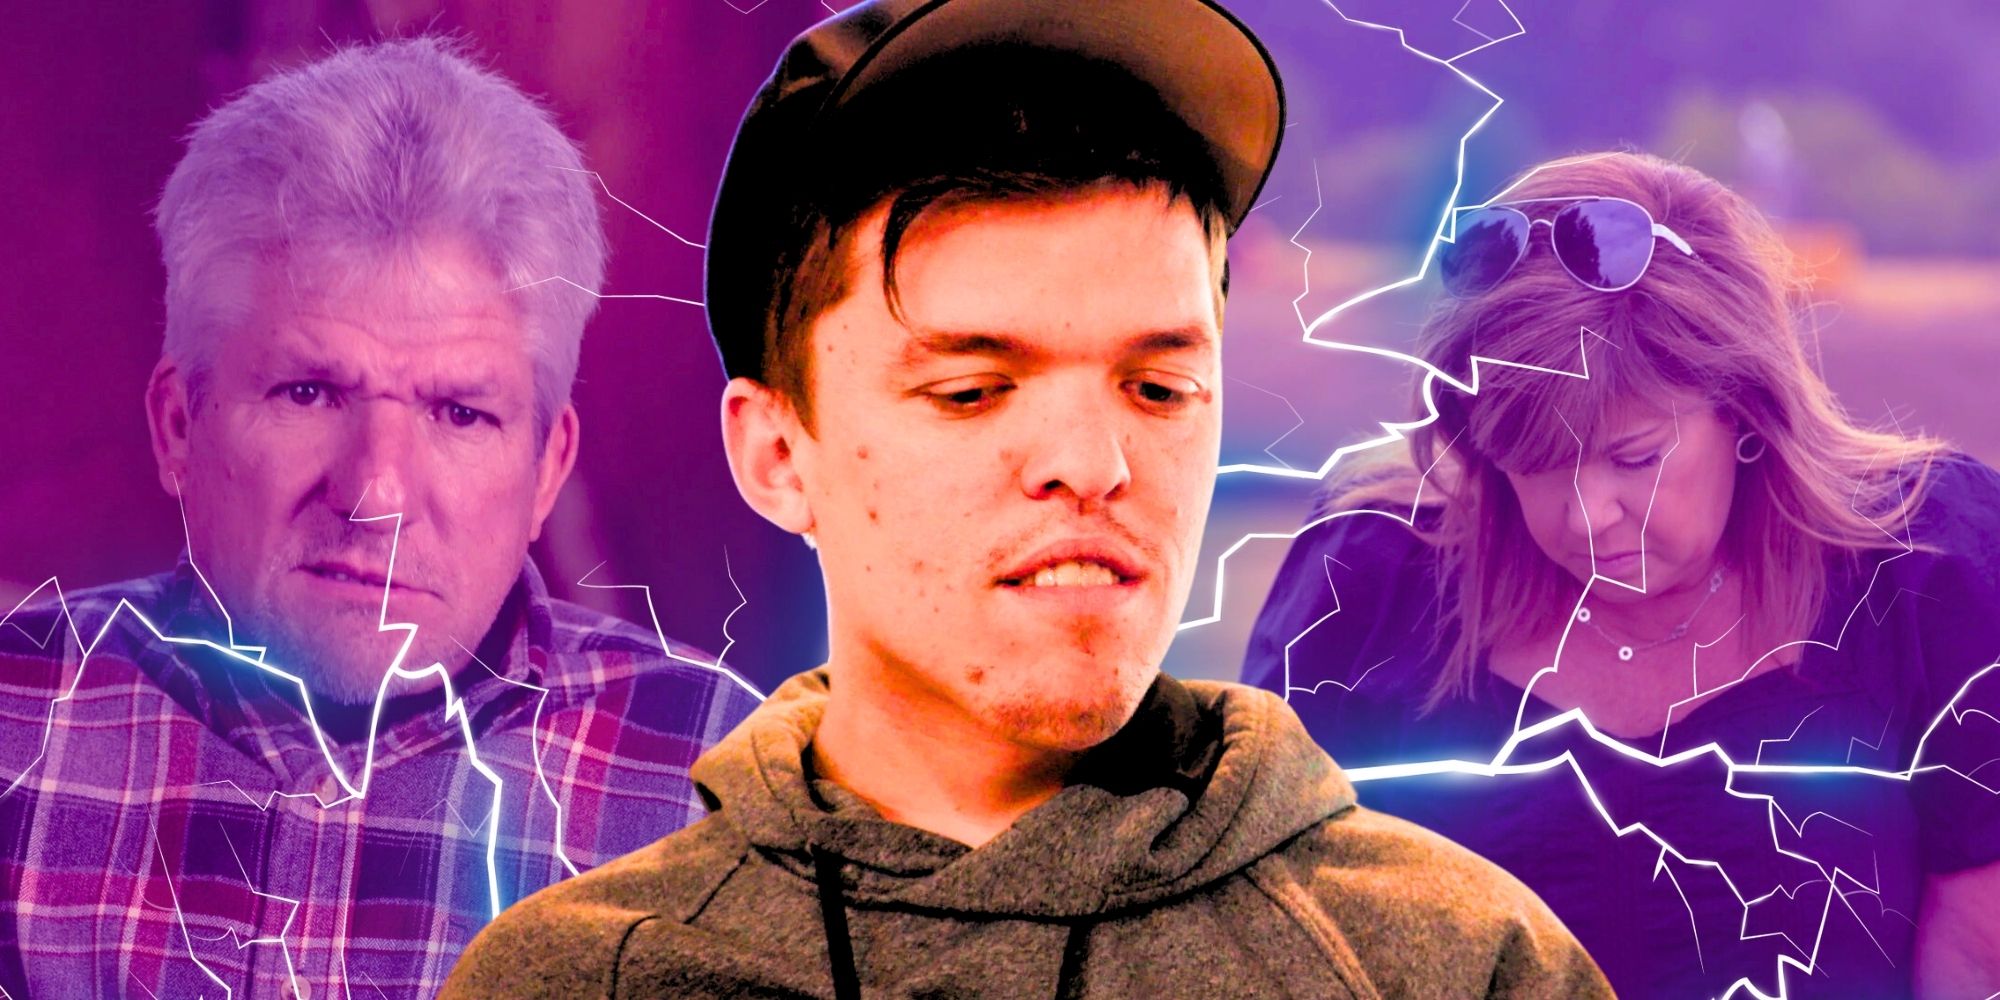 Little People, Big World’s Zach Roloff, Matt Roloff & Caryn Chandler look down with serious expressions, while surrounded by lightning bolts.